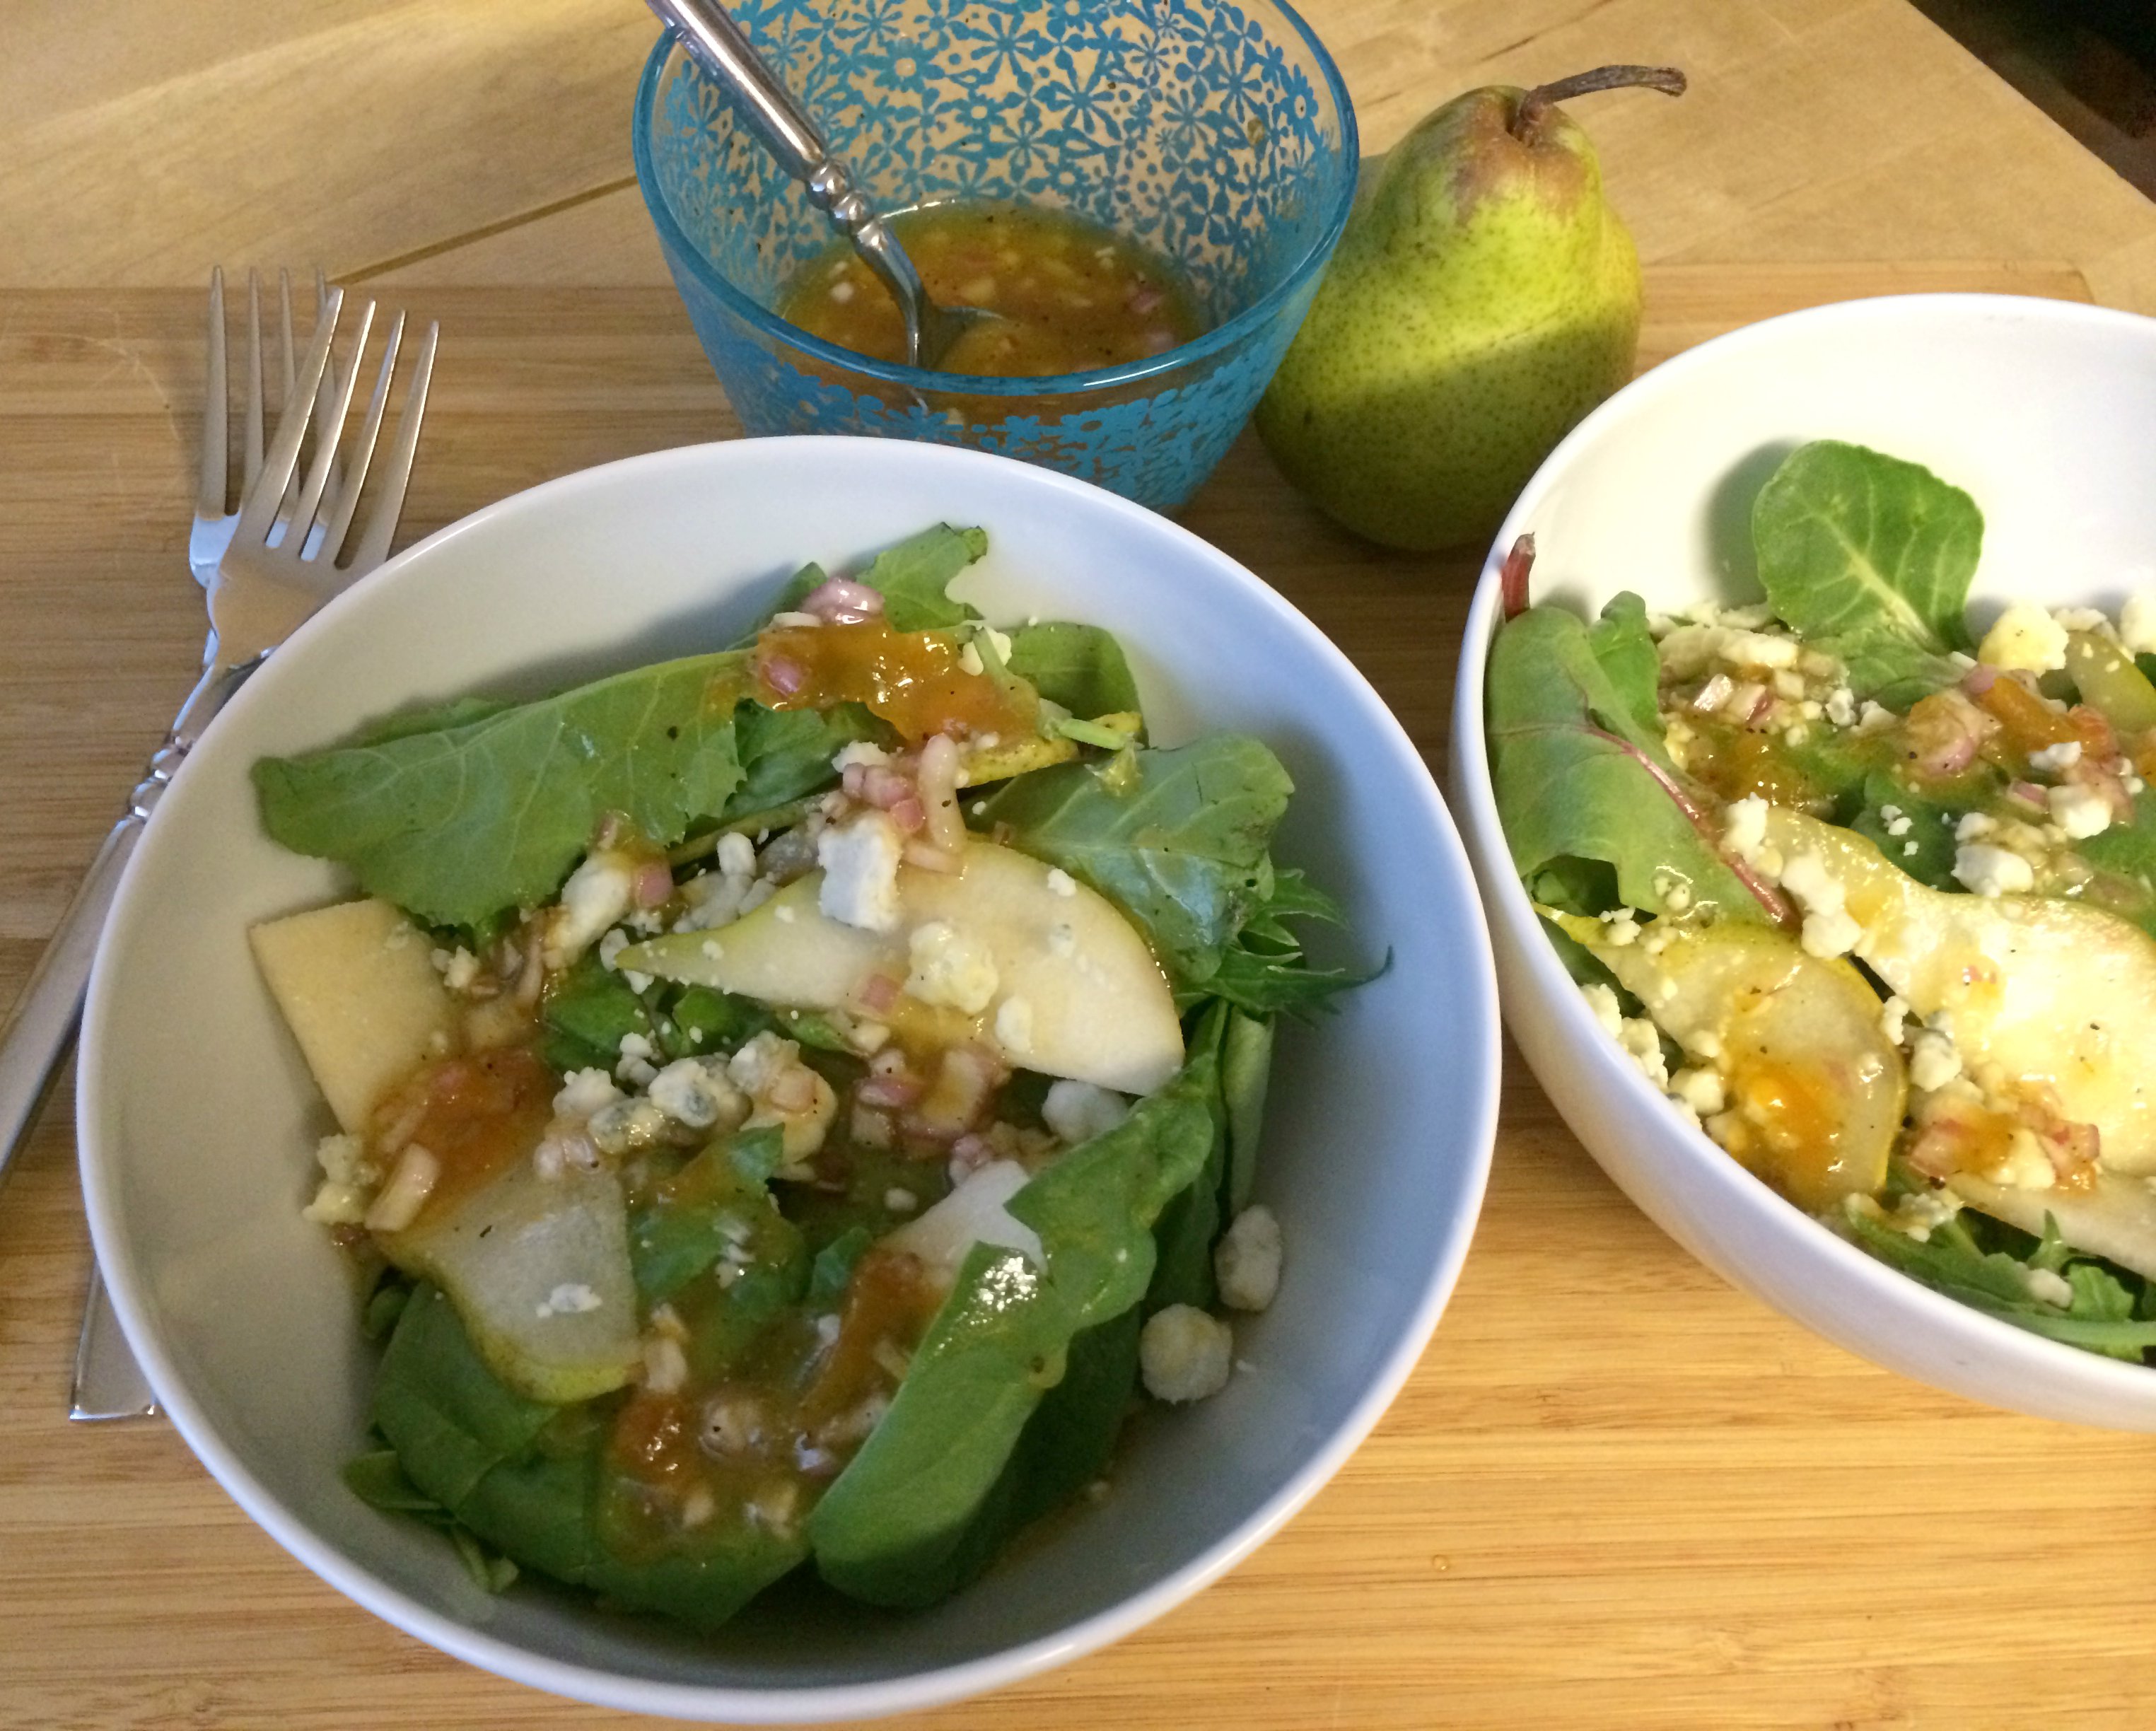 Pear and Blue Cheese Salad with Homemade Apricot Dressing